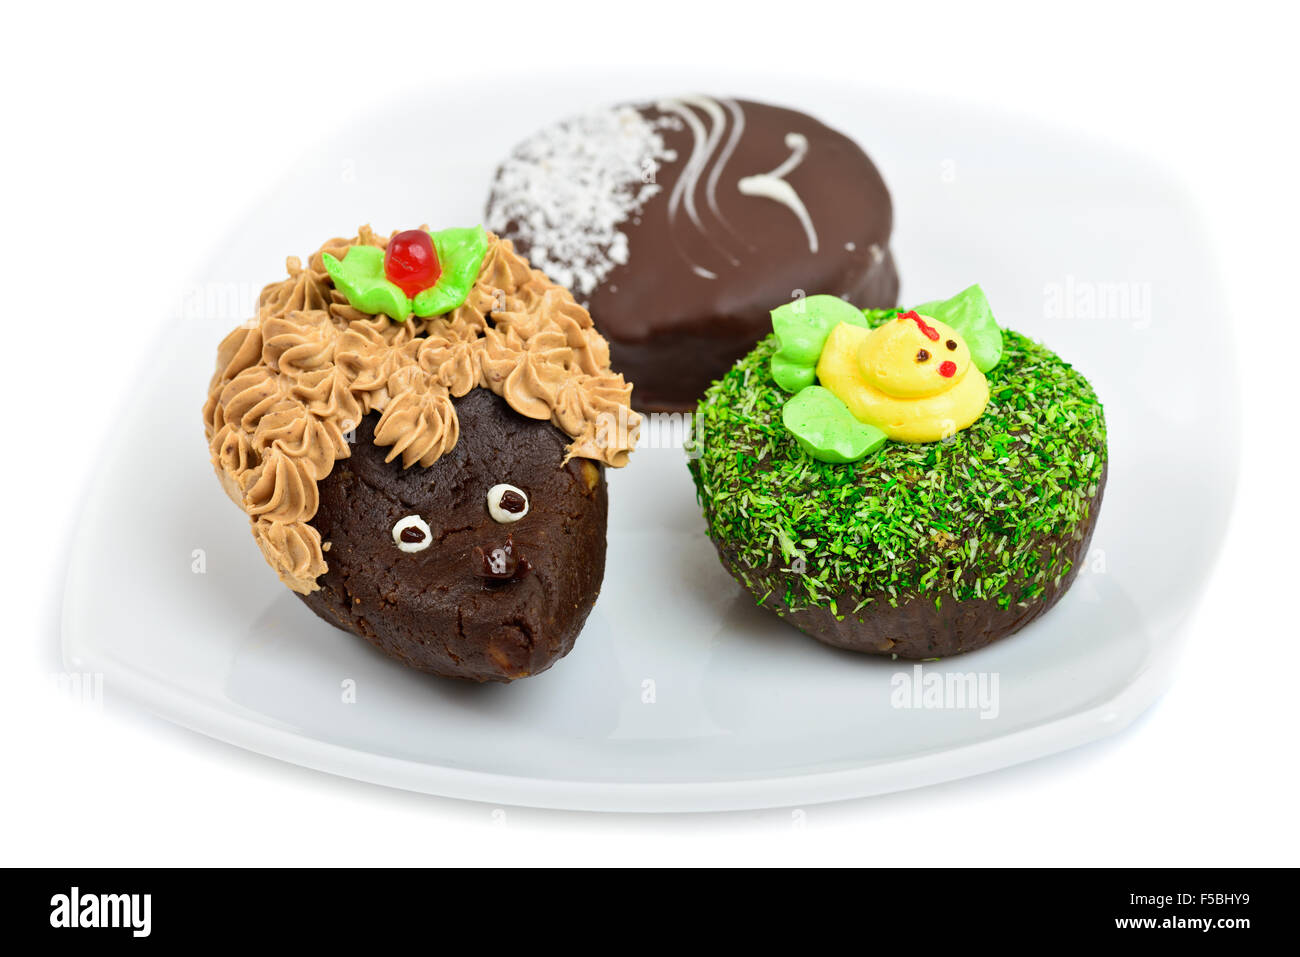 Artistic chocolate cakes decorated as hedgehog, duck and seagull Stock Photo